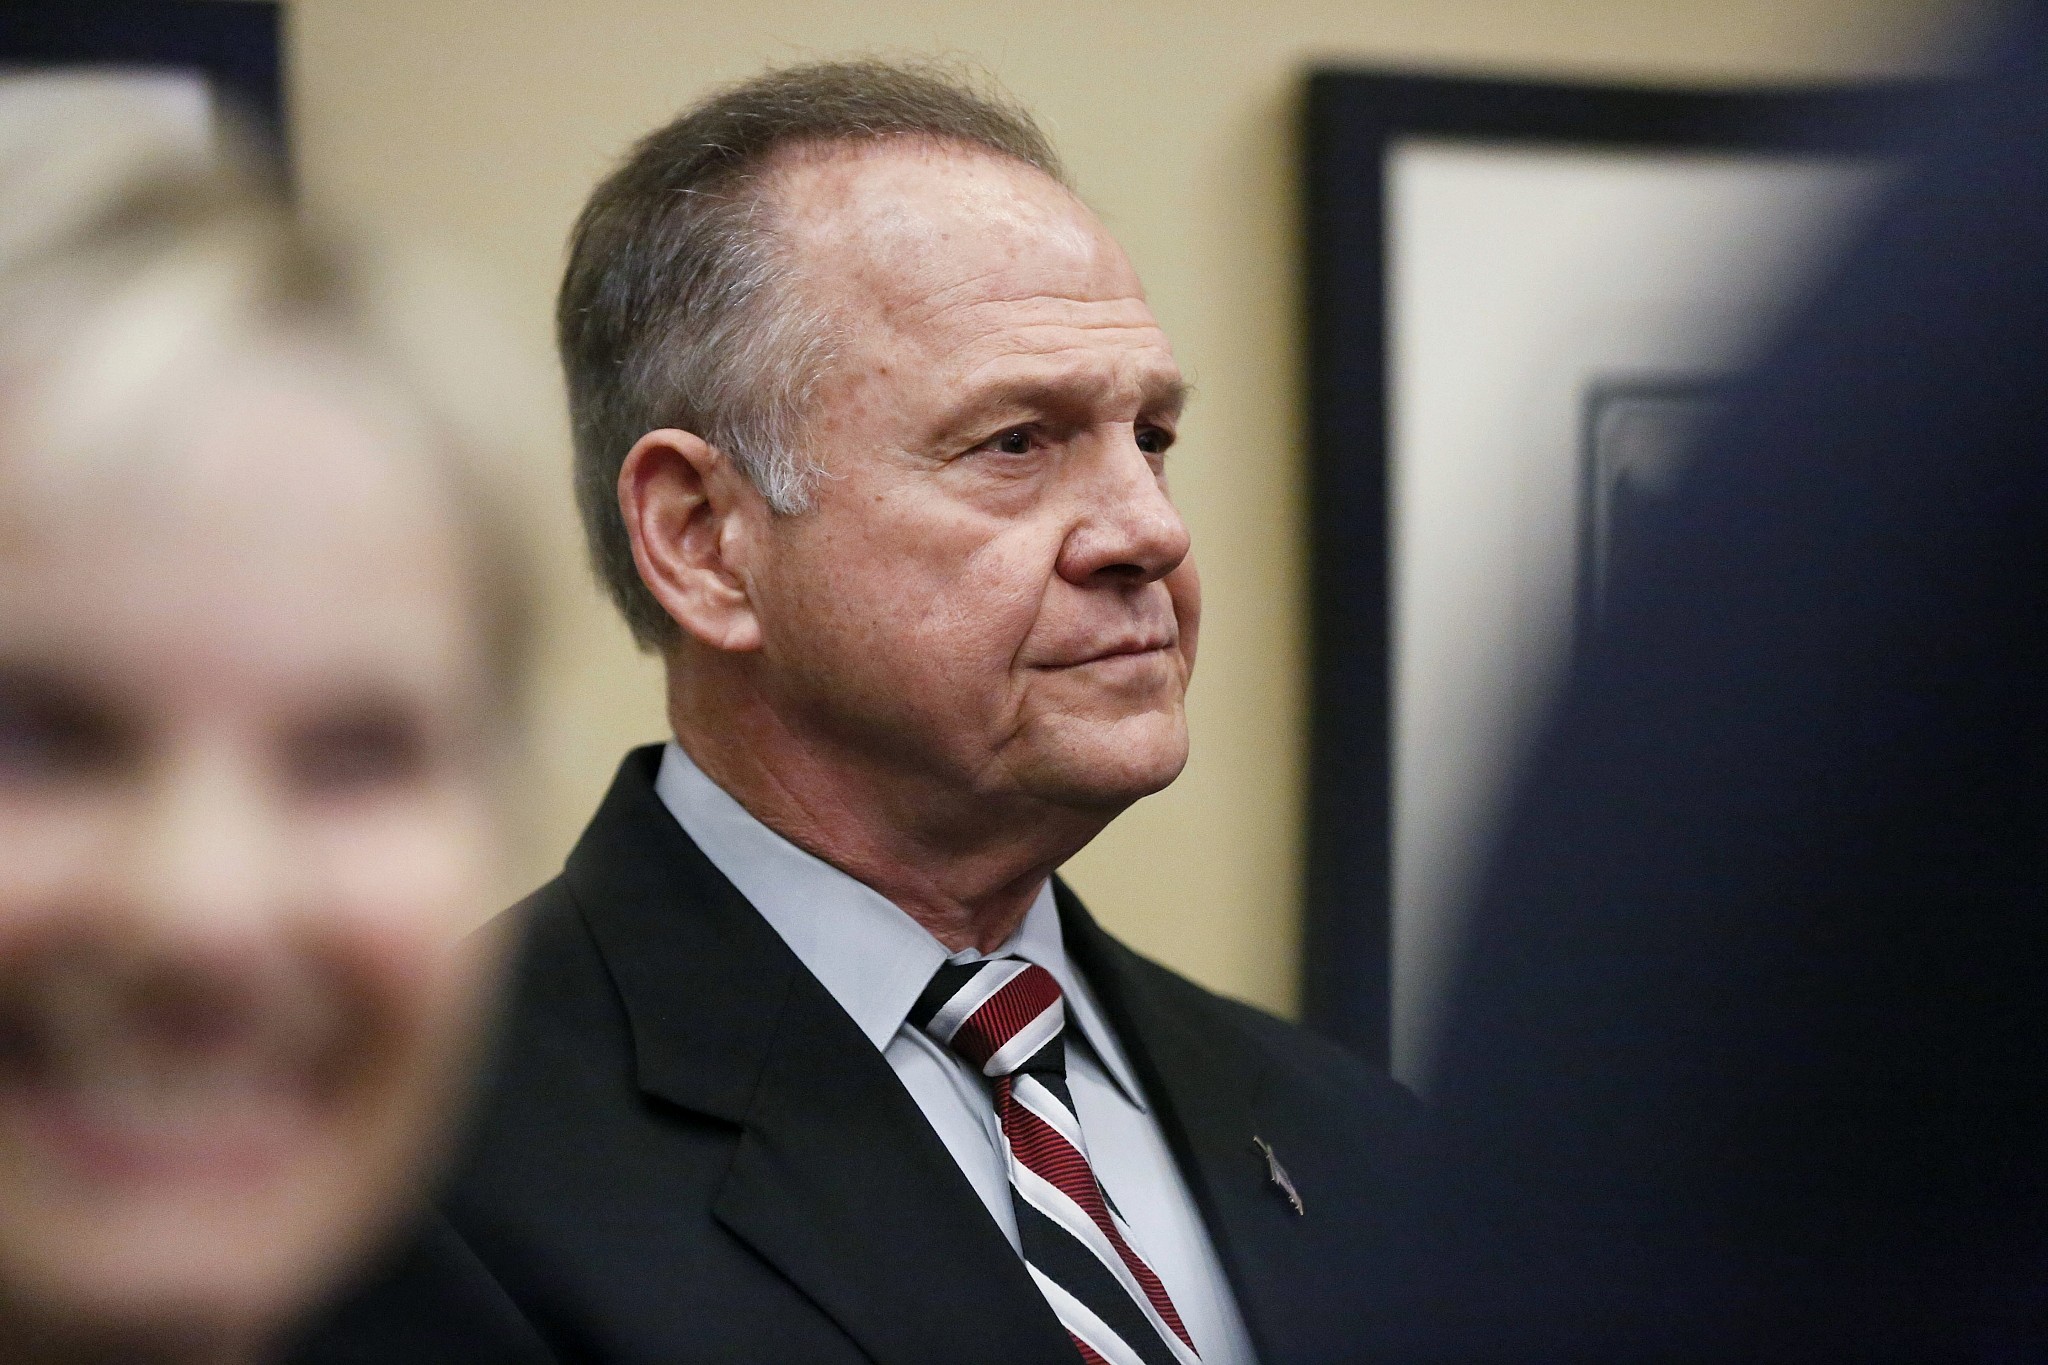 New sex assault allegation hits Moore, who calls it false The Times of Israel pic